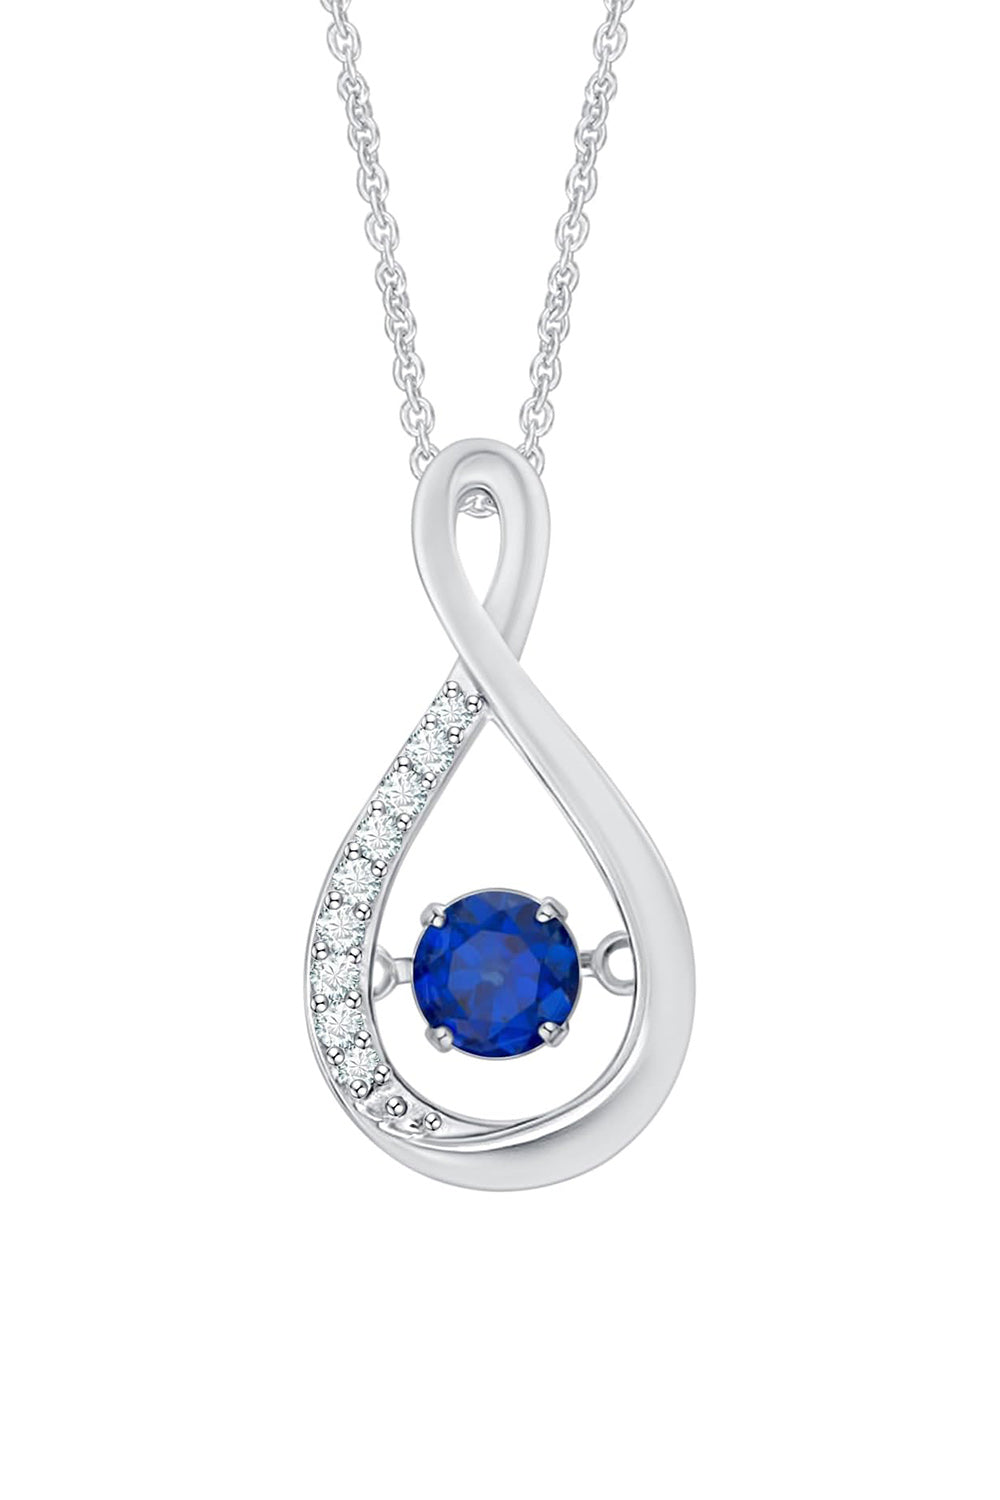 White Gold Color with Blue Sapphire Infinity Swirl Pendant Necklace